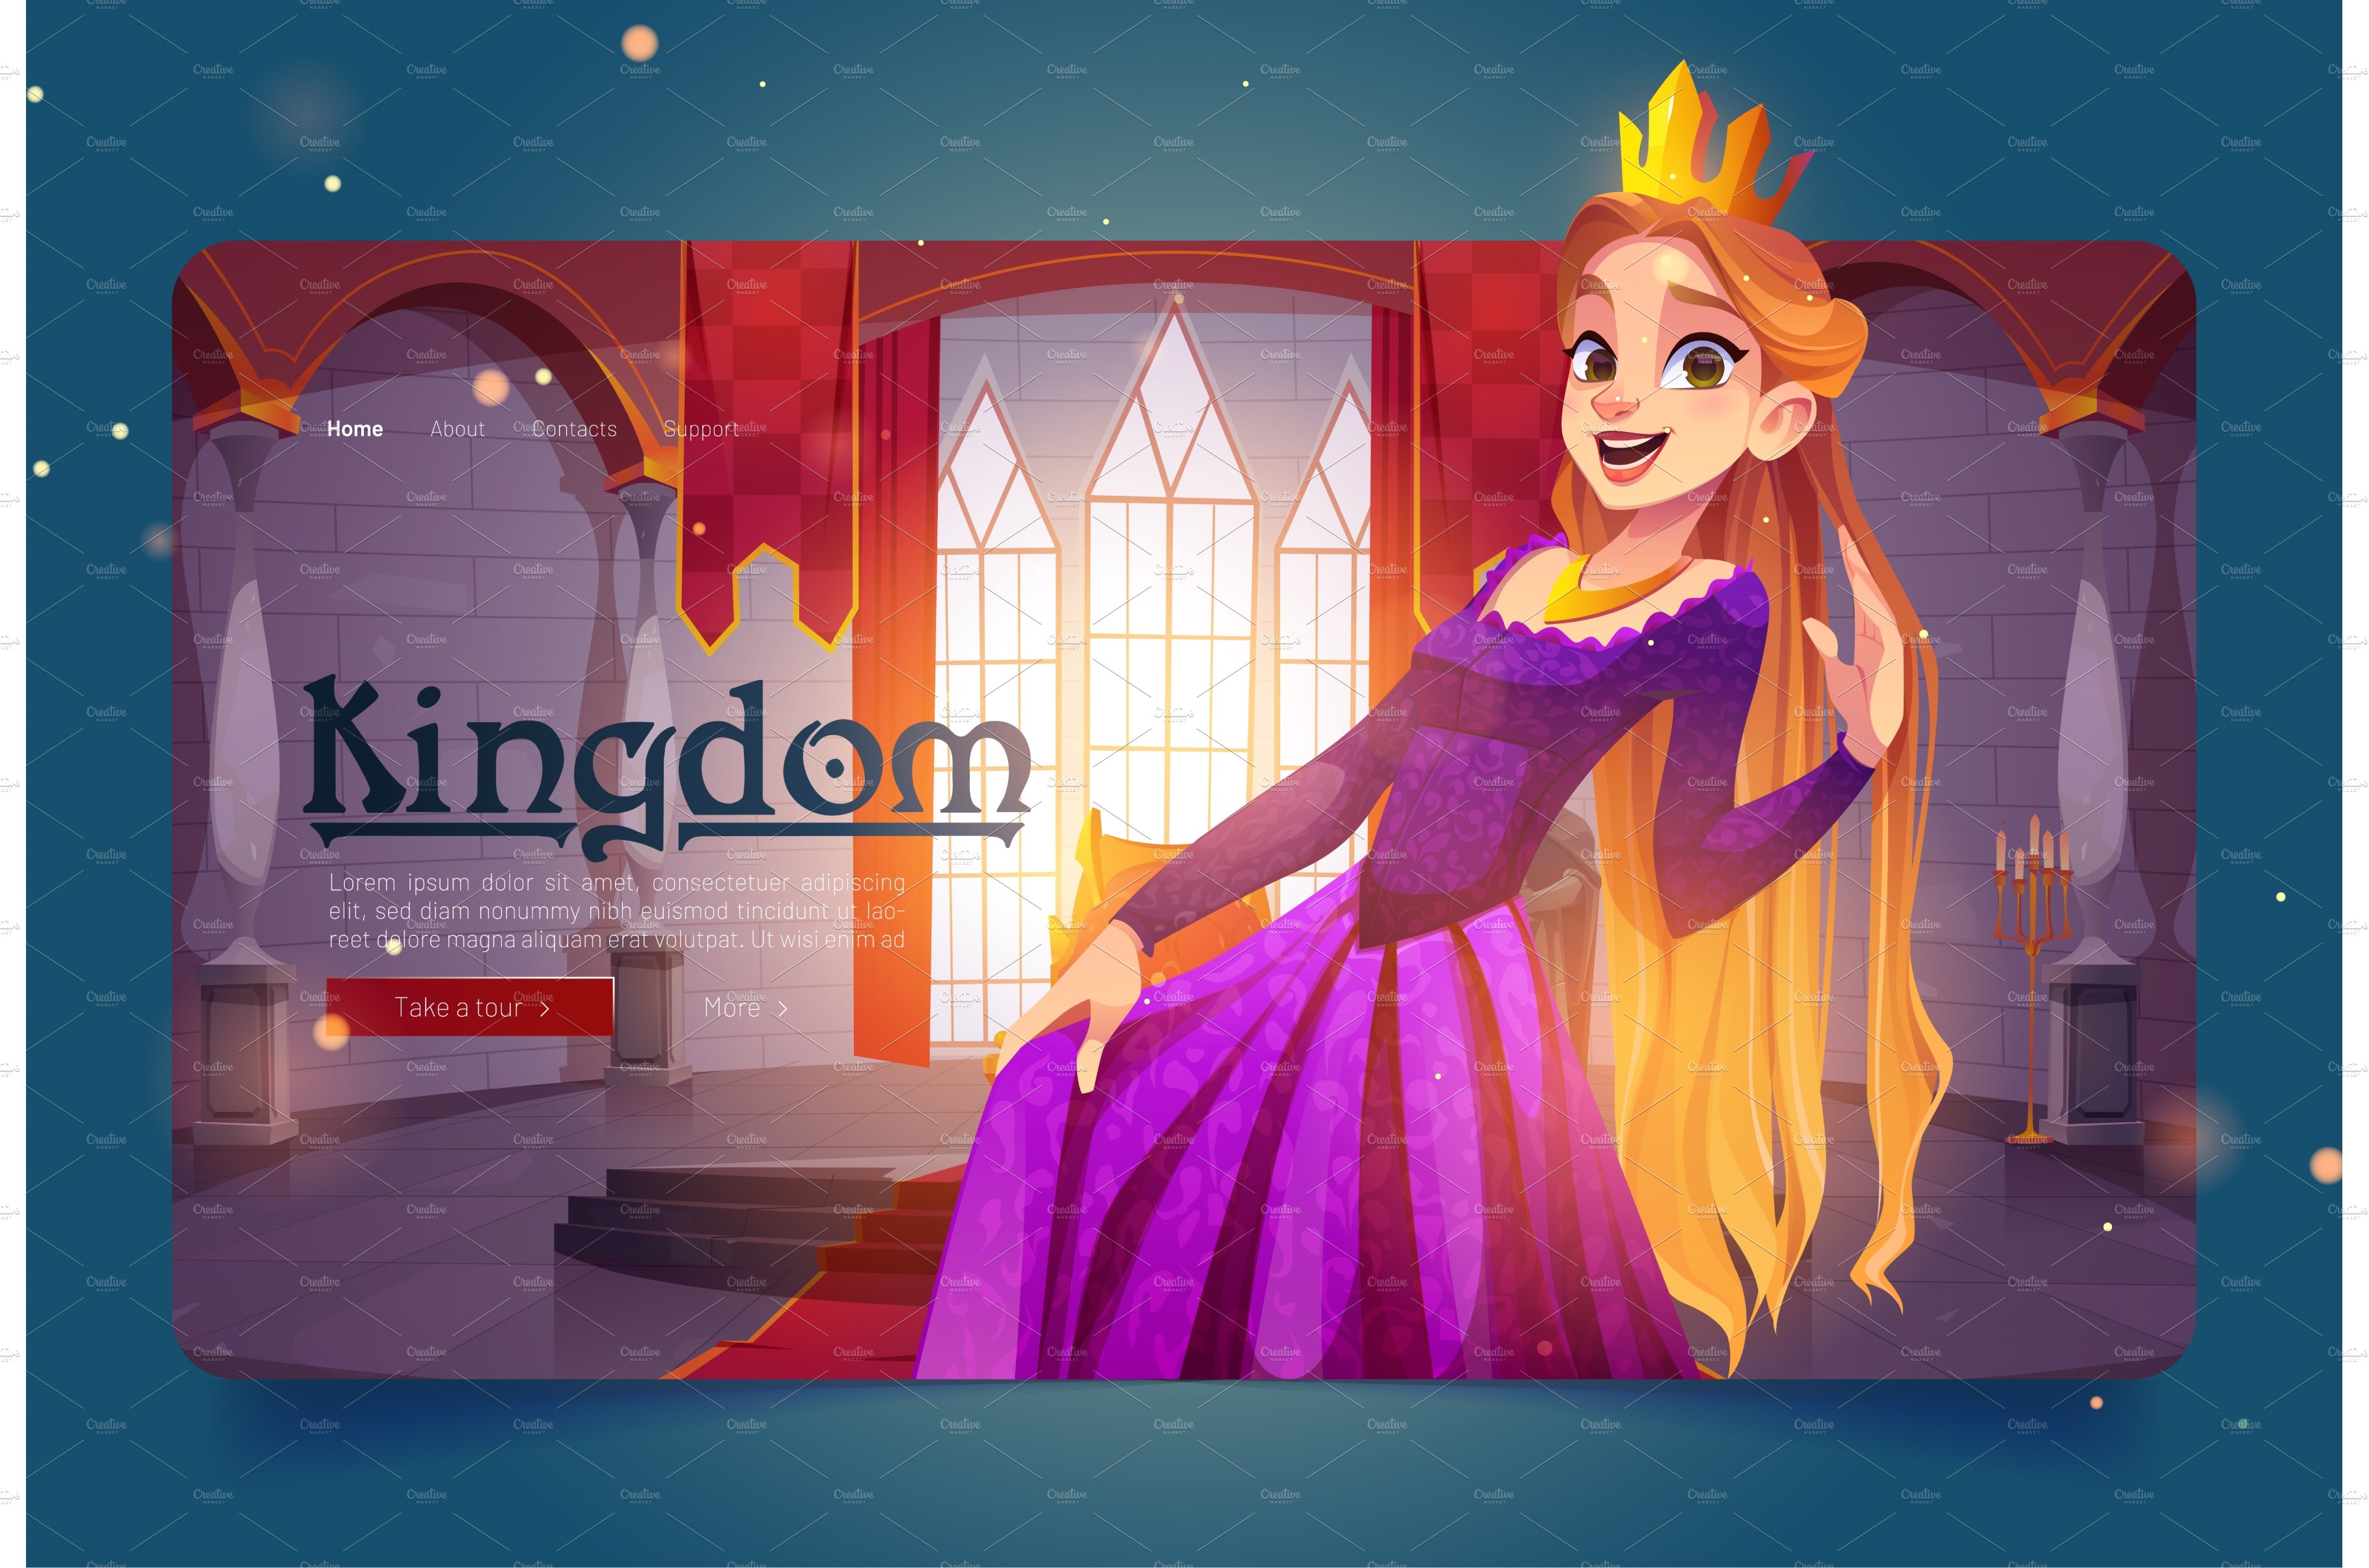 Kingdom banner with princess in cover image.